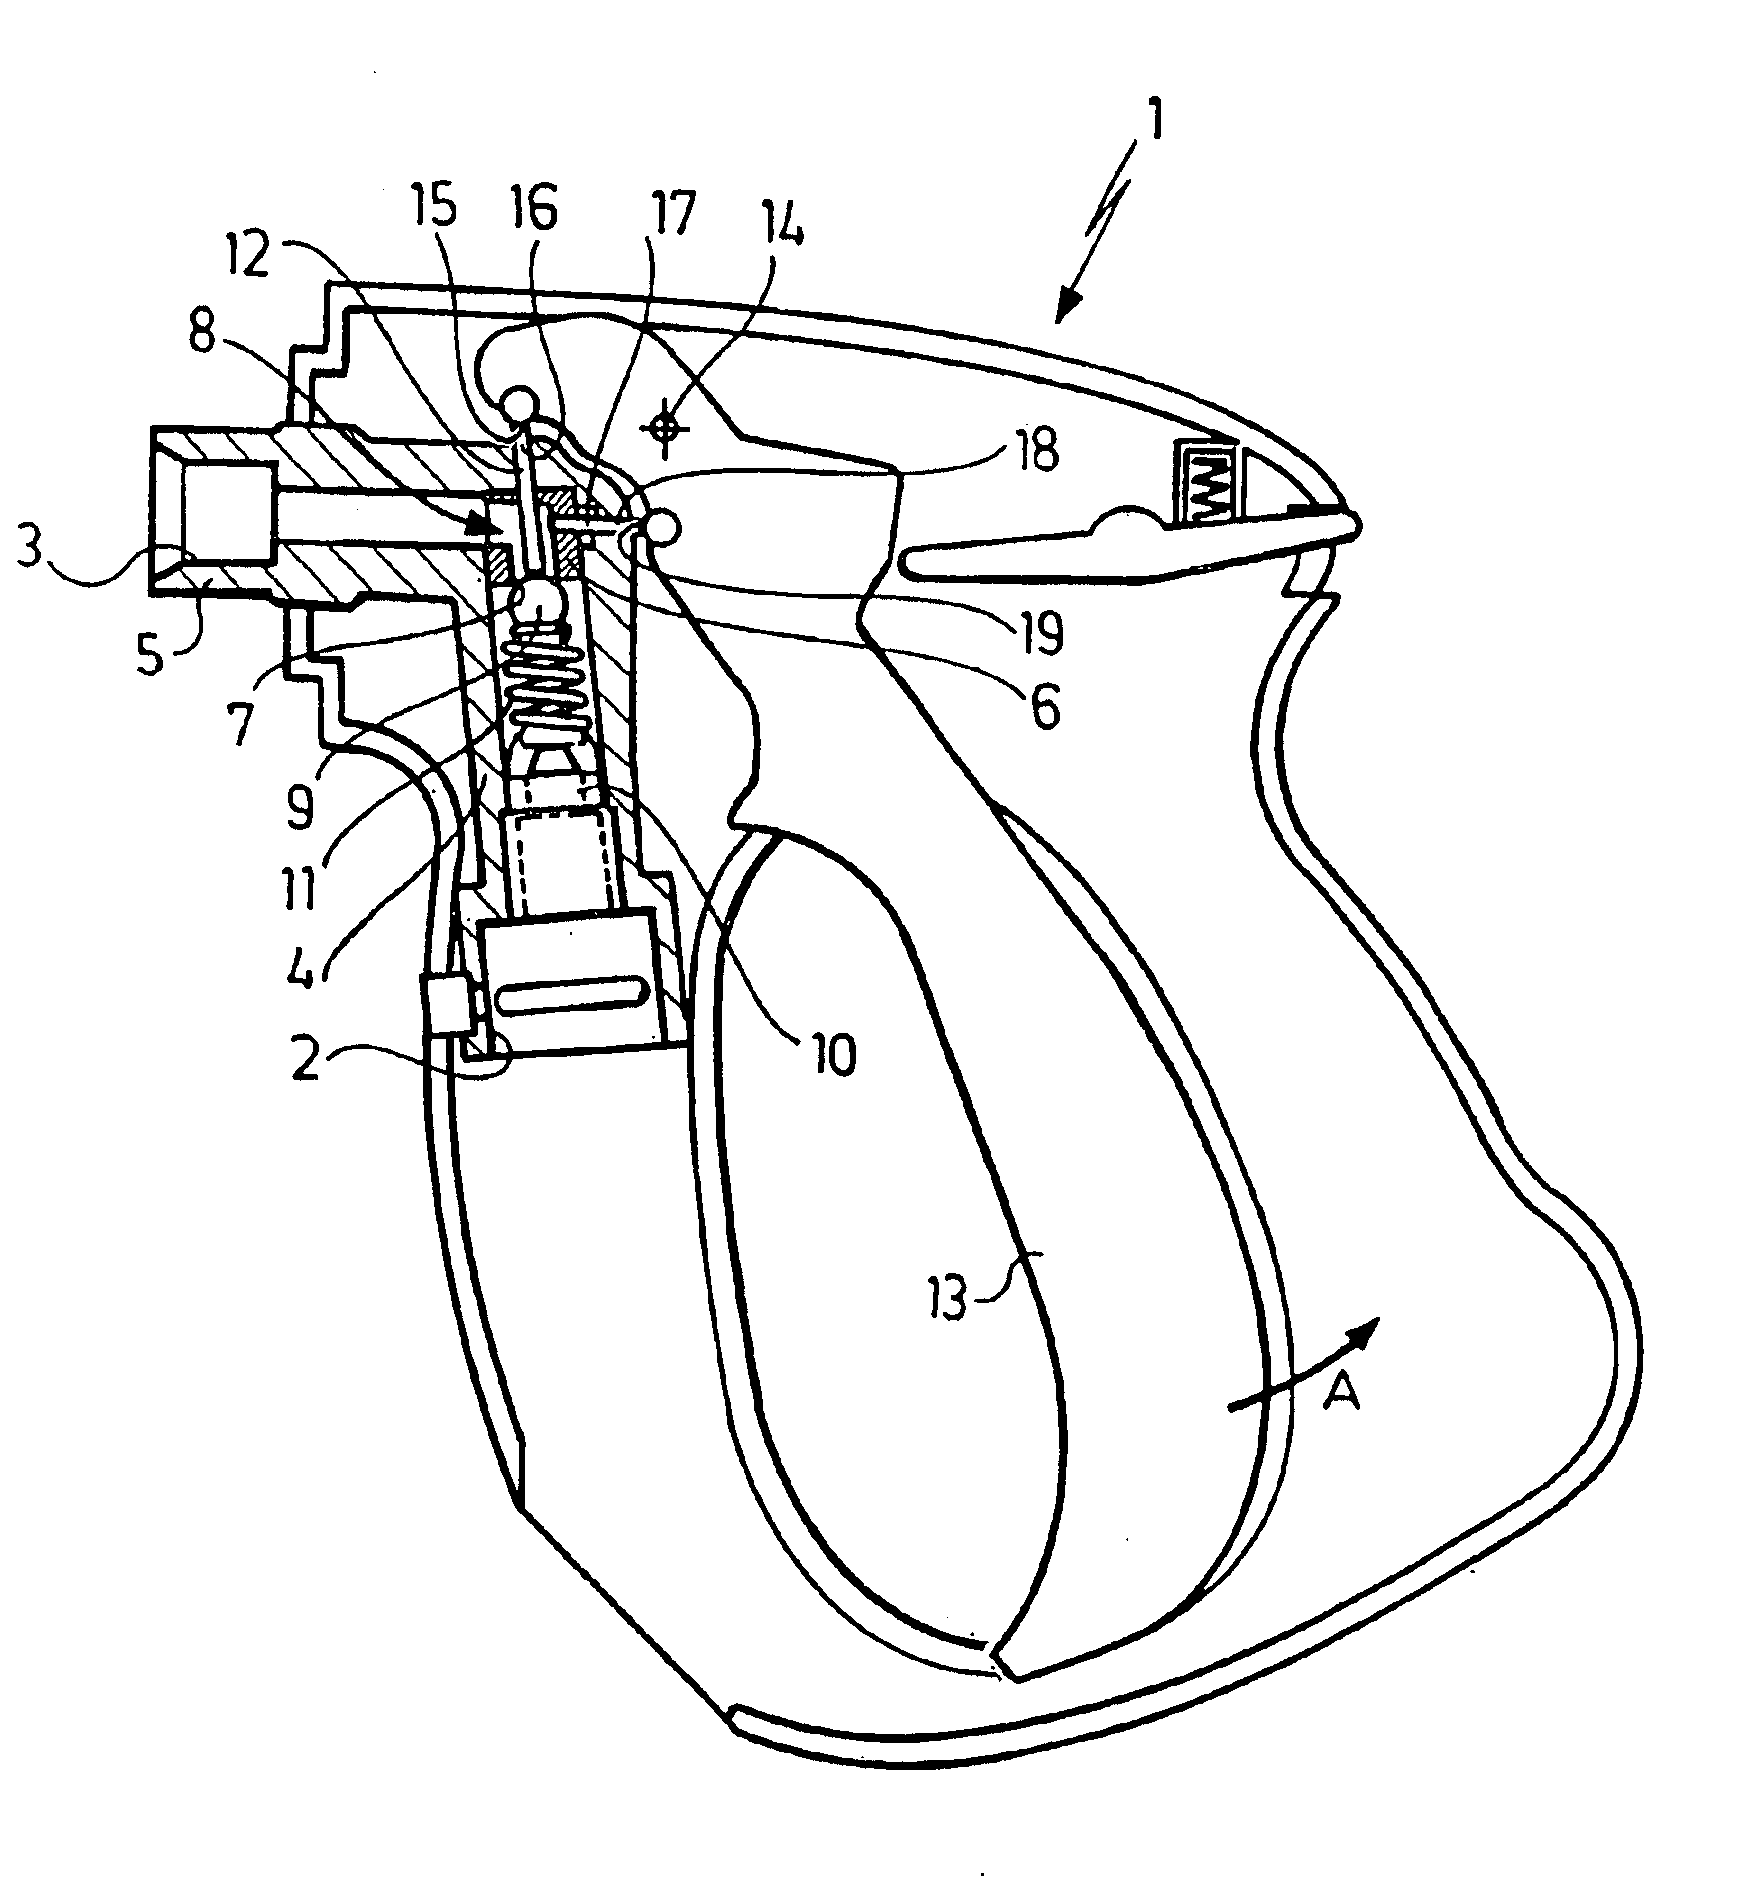 Closure device for the fluid delivery line of a high-pressure cleaning apparatus